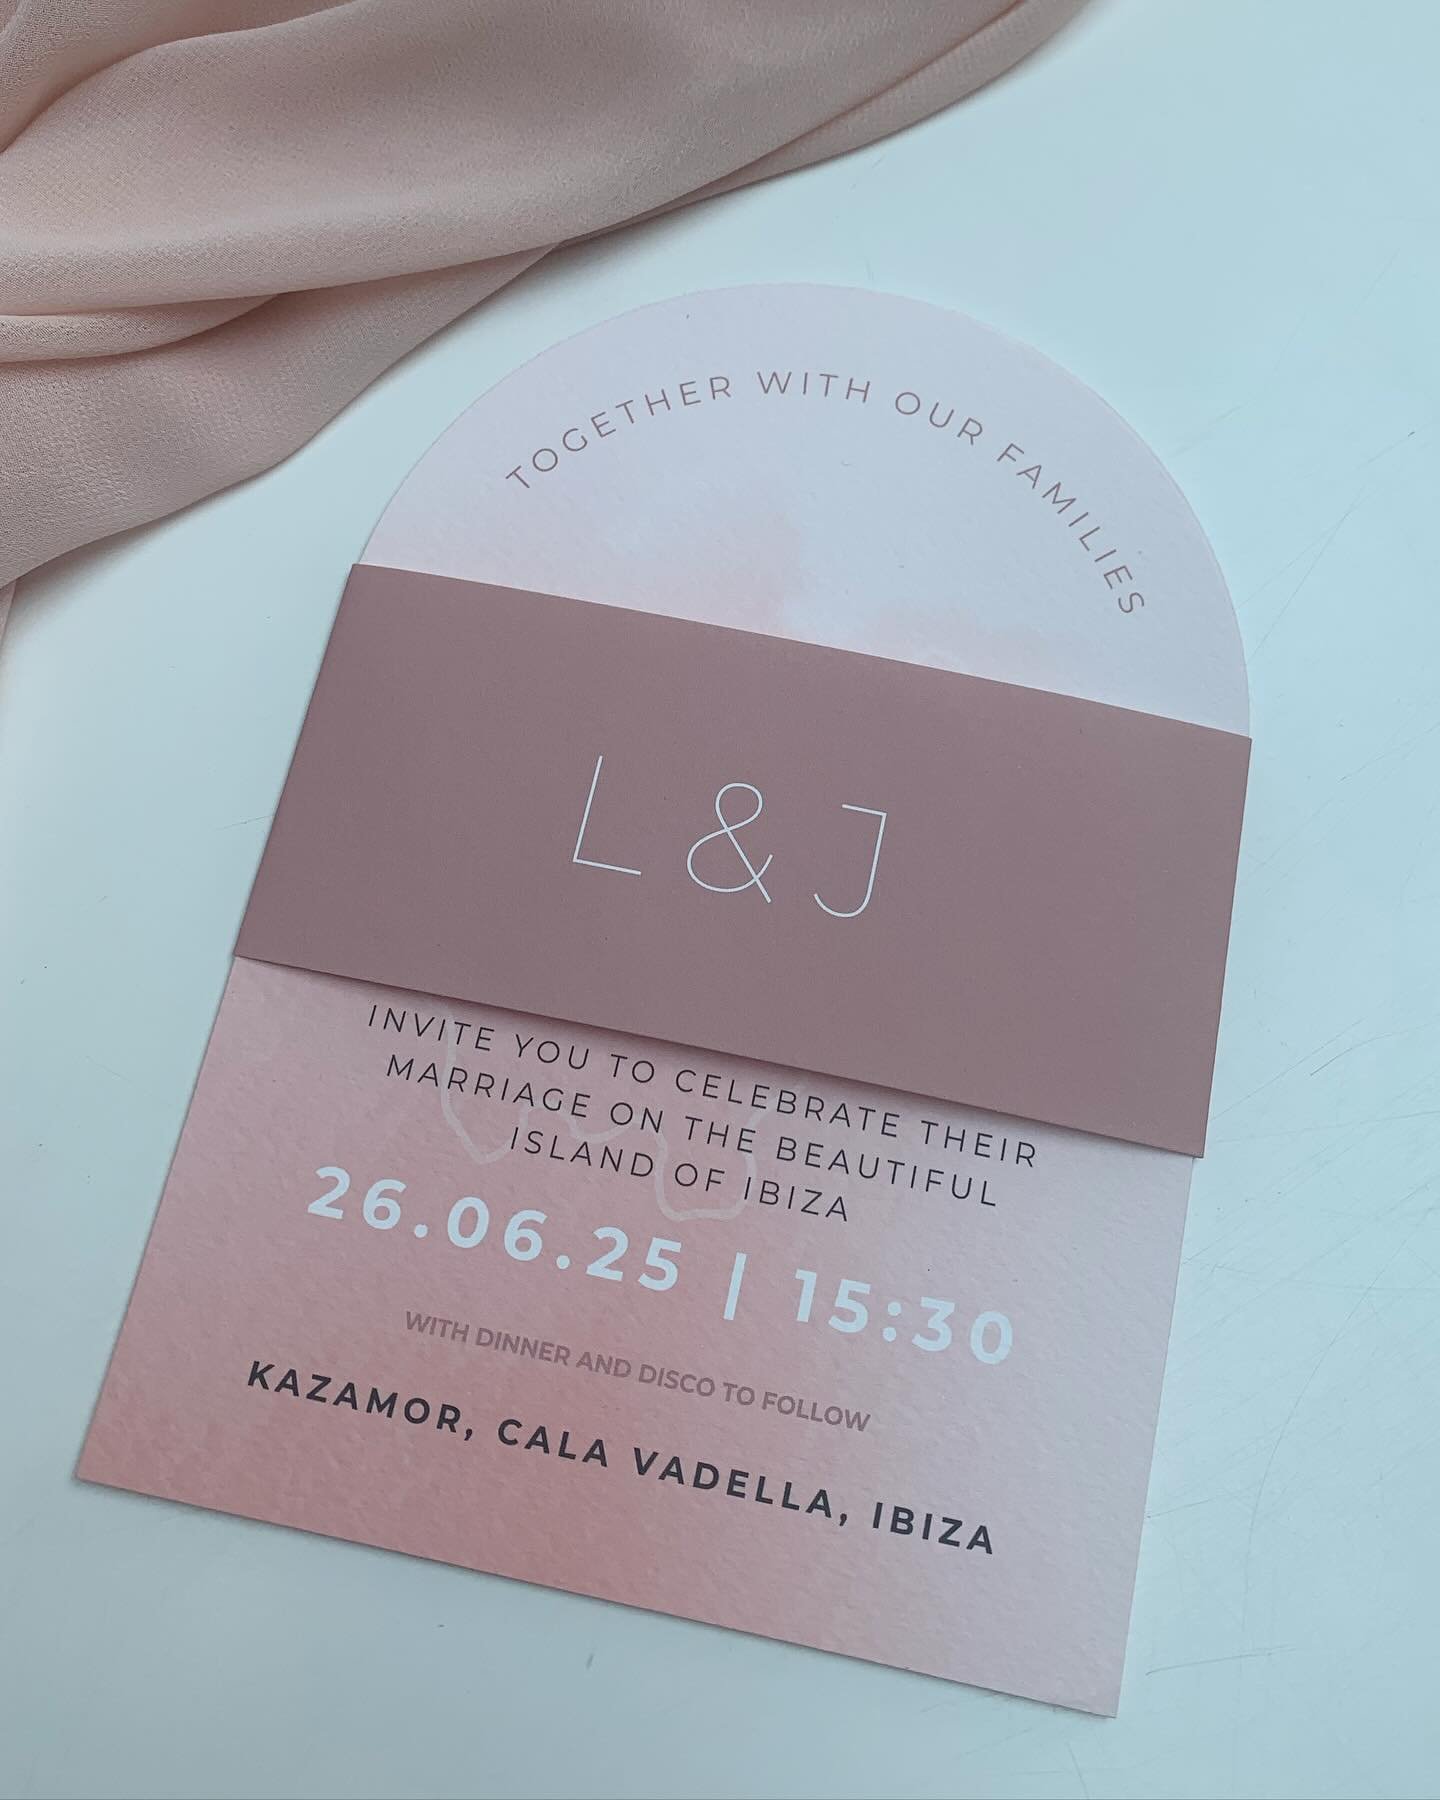 Follow the call of the disco ball 🪩

Ibiza dreaming for L&amp;J and the final piece of their before the day stationery. A gorgeous, soft muted palette for these invitations. All the details you need for a destination wedding added to the information